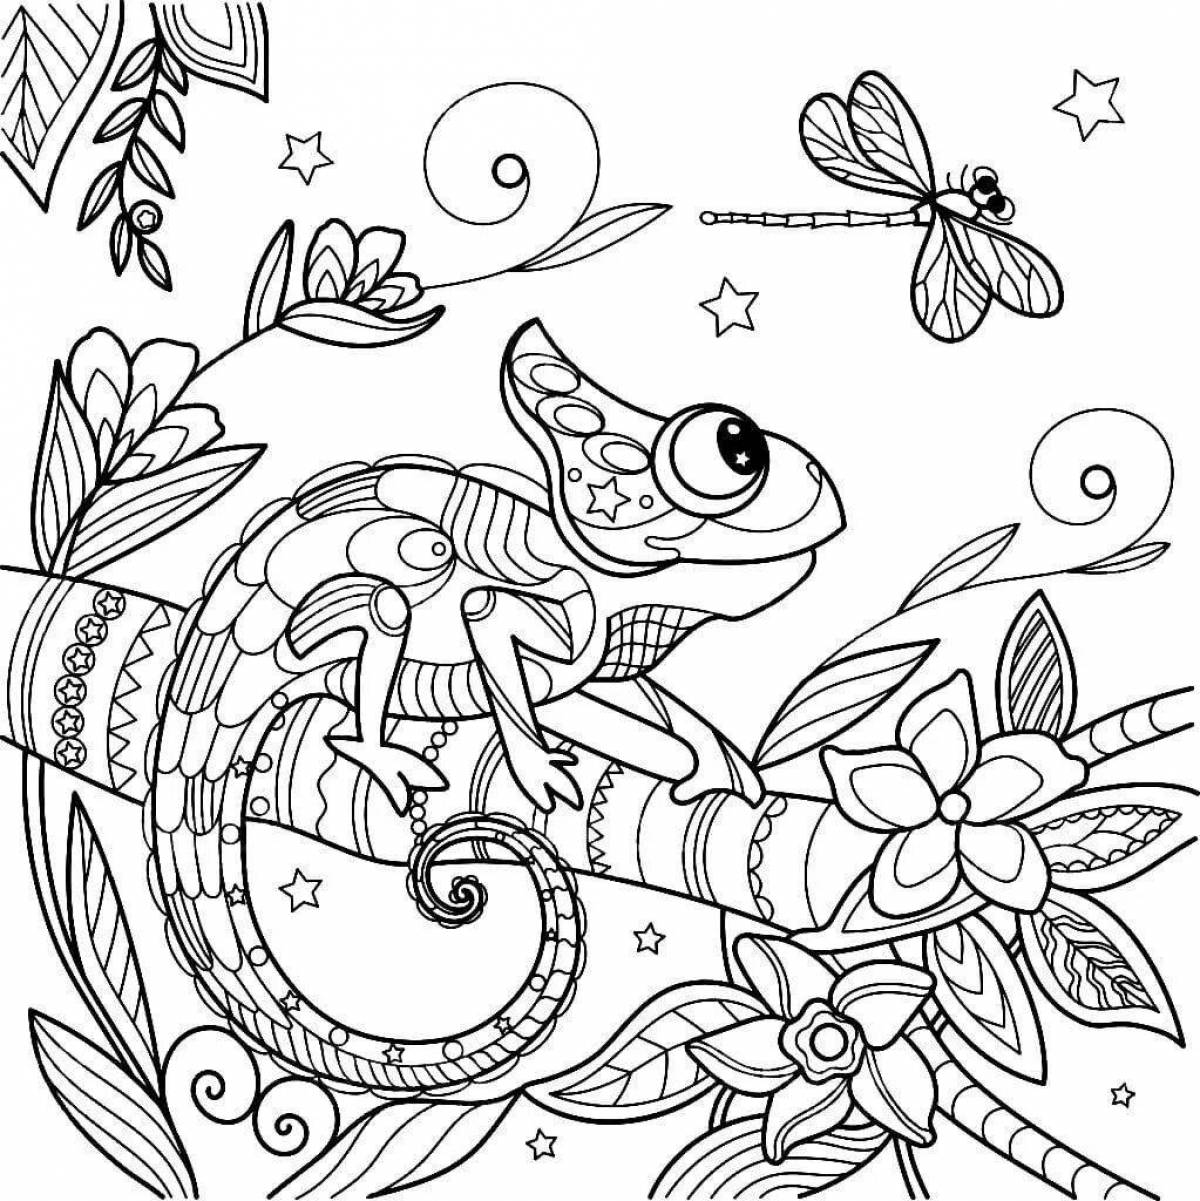 Relaxing coloring book antistress chameleon